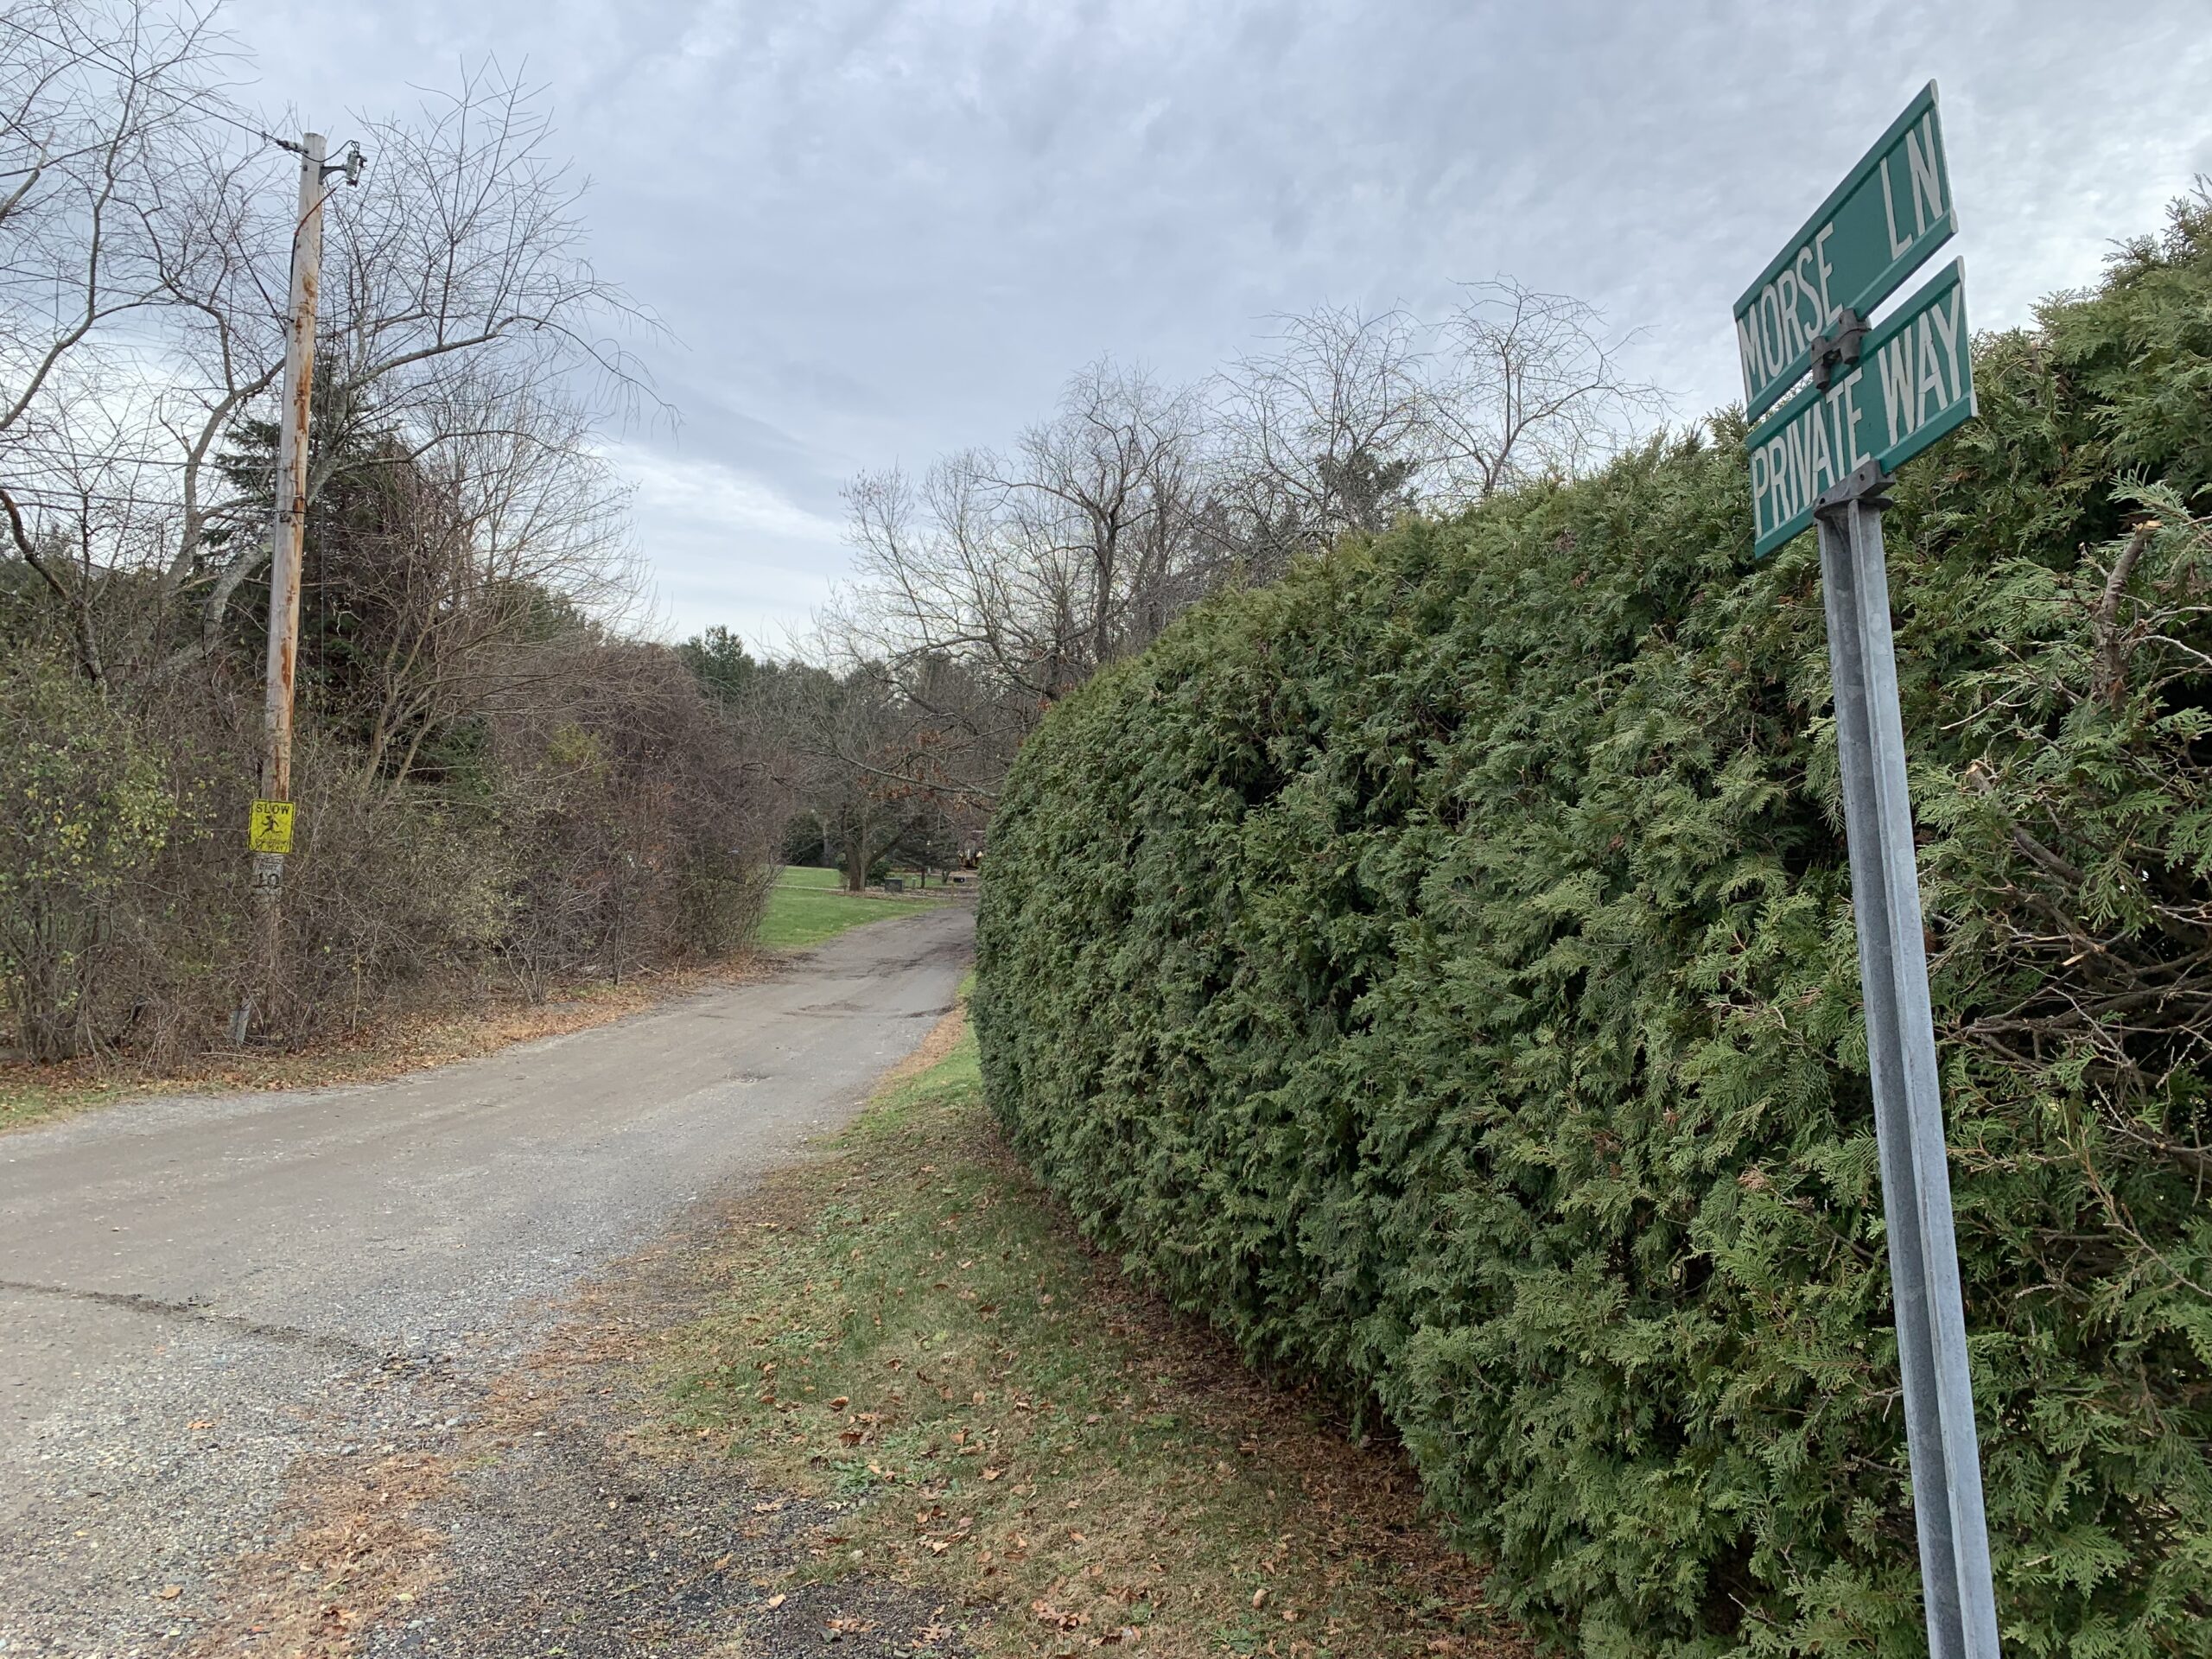 Planning Board approves Morse Lane family subdivision, sets up site walk for The Trails